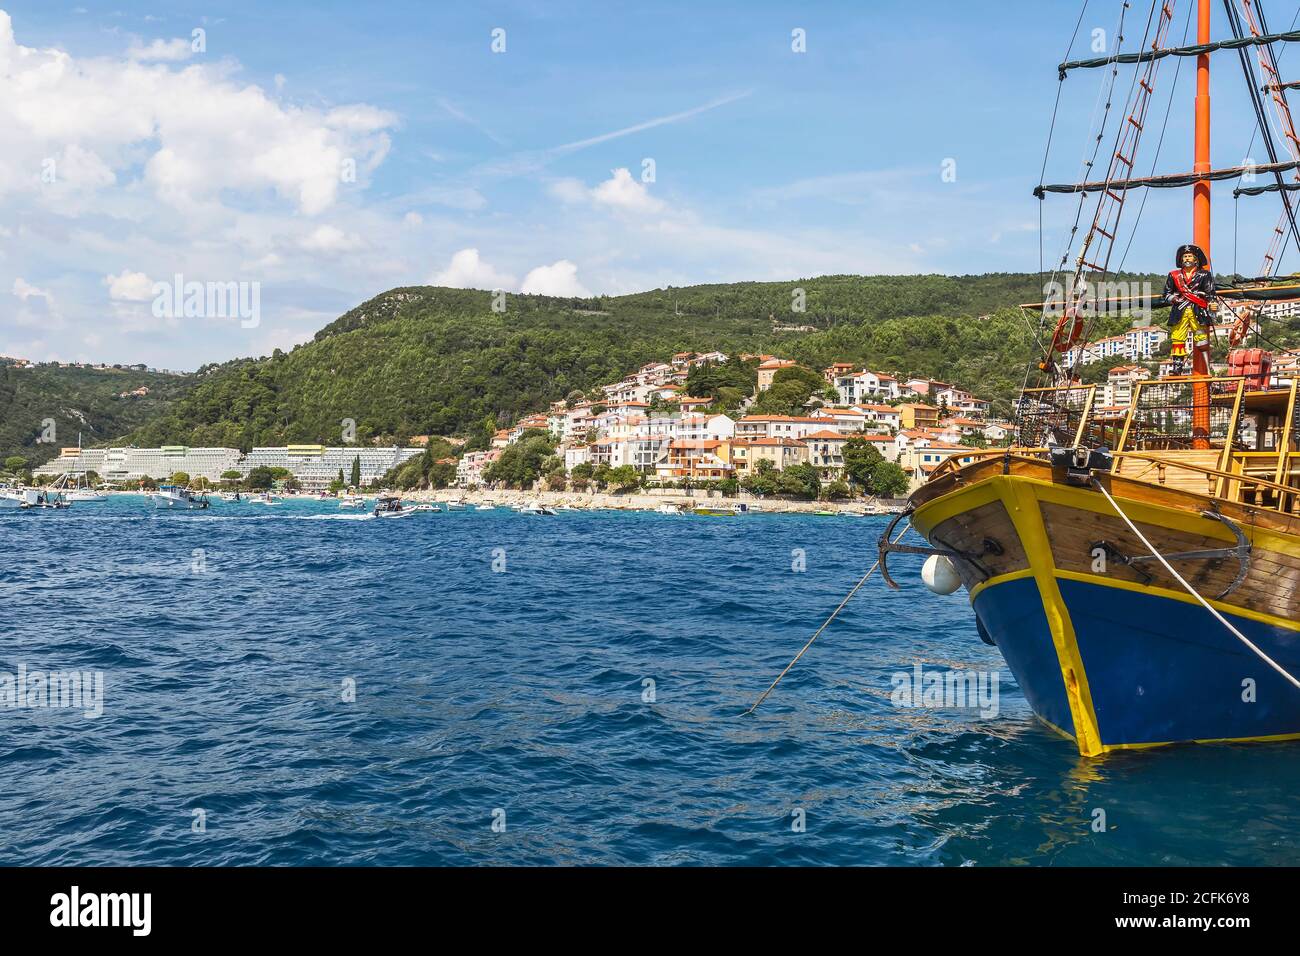 RABAC, CROATIA - AUGUST 29, 2020 - View of Rabac on the beach Girandella with boats in the harbor, in the background hotel facilities, Istria, Croatia Stock Photo